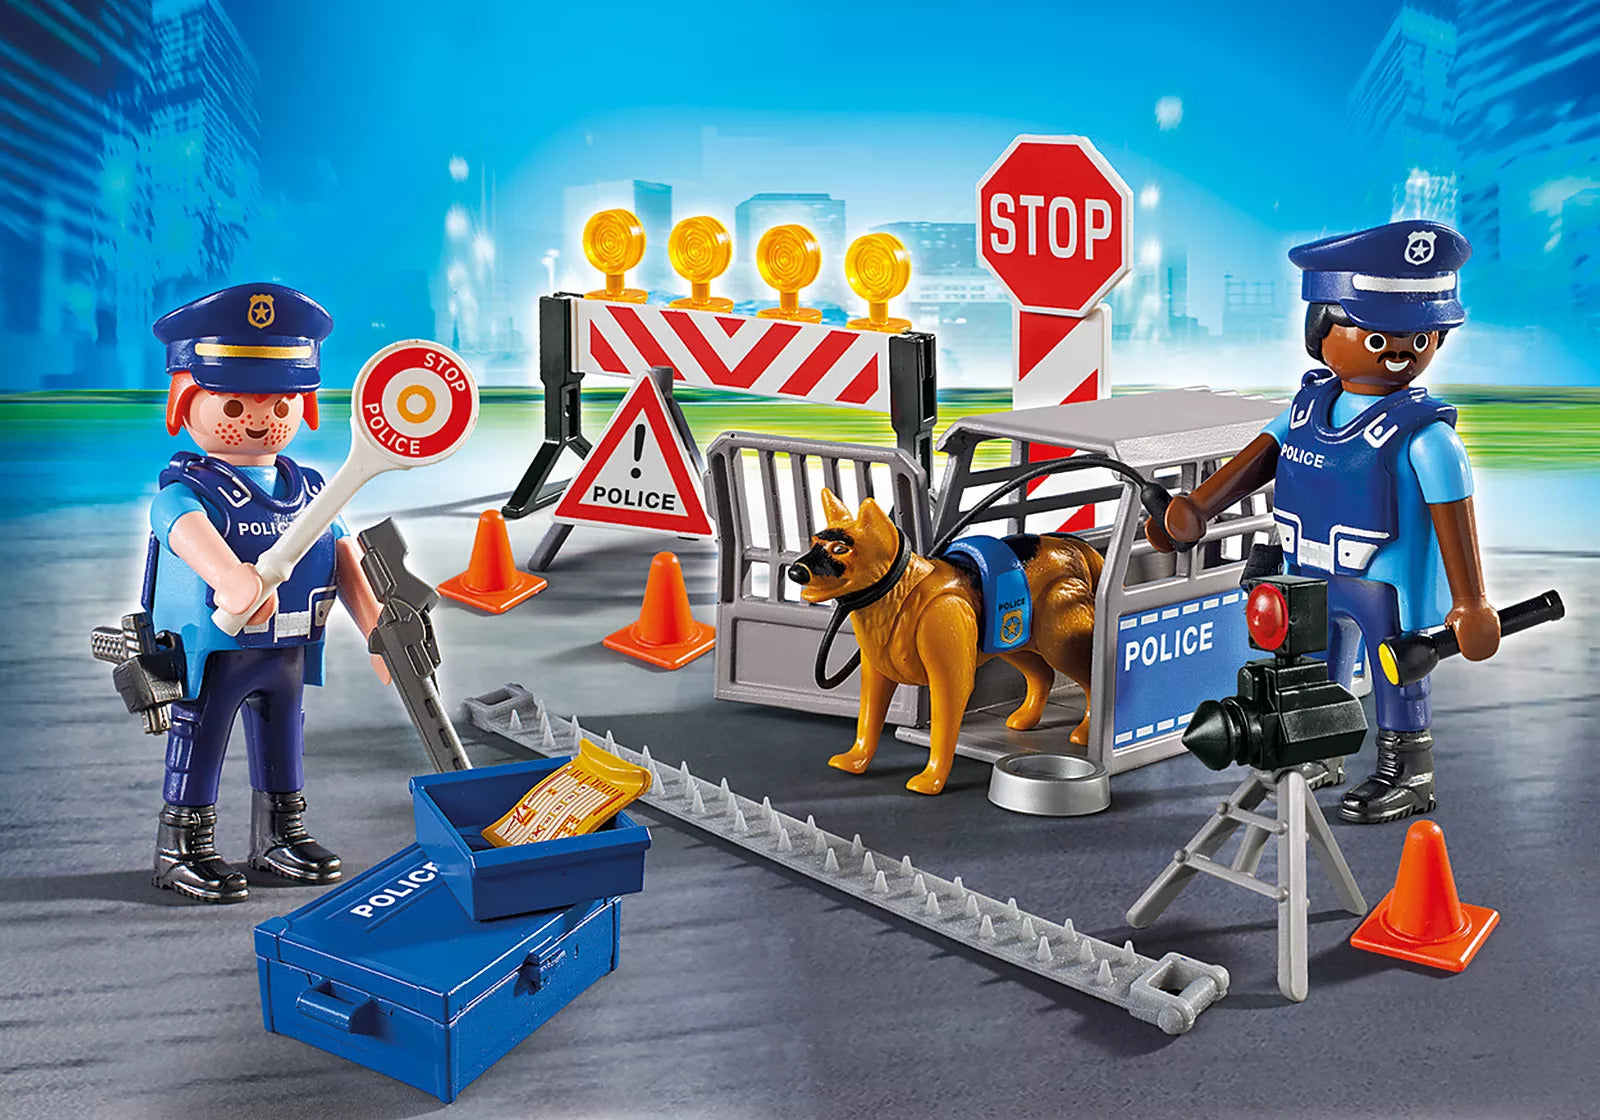 Playmobil City Action - Police Roadblock with Figures